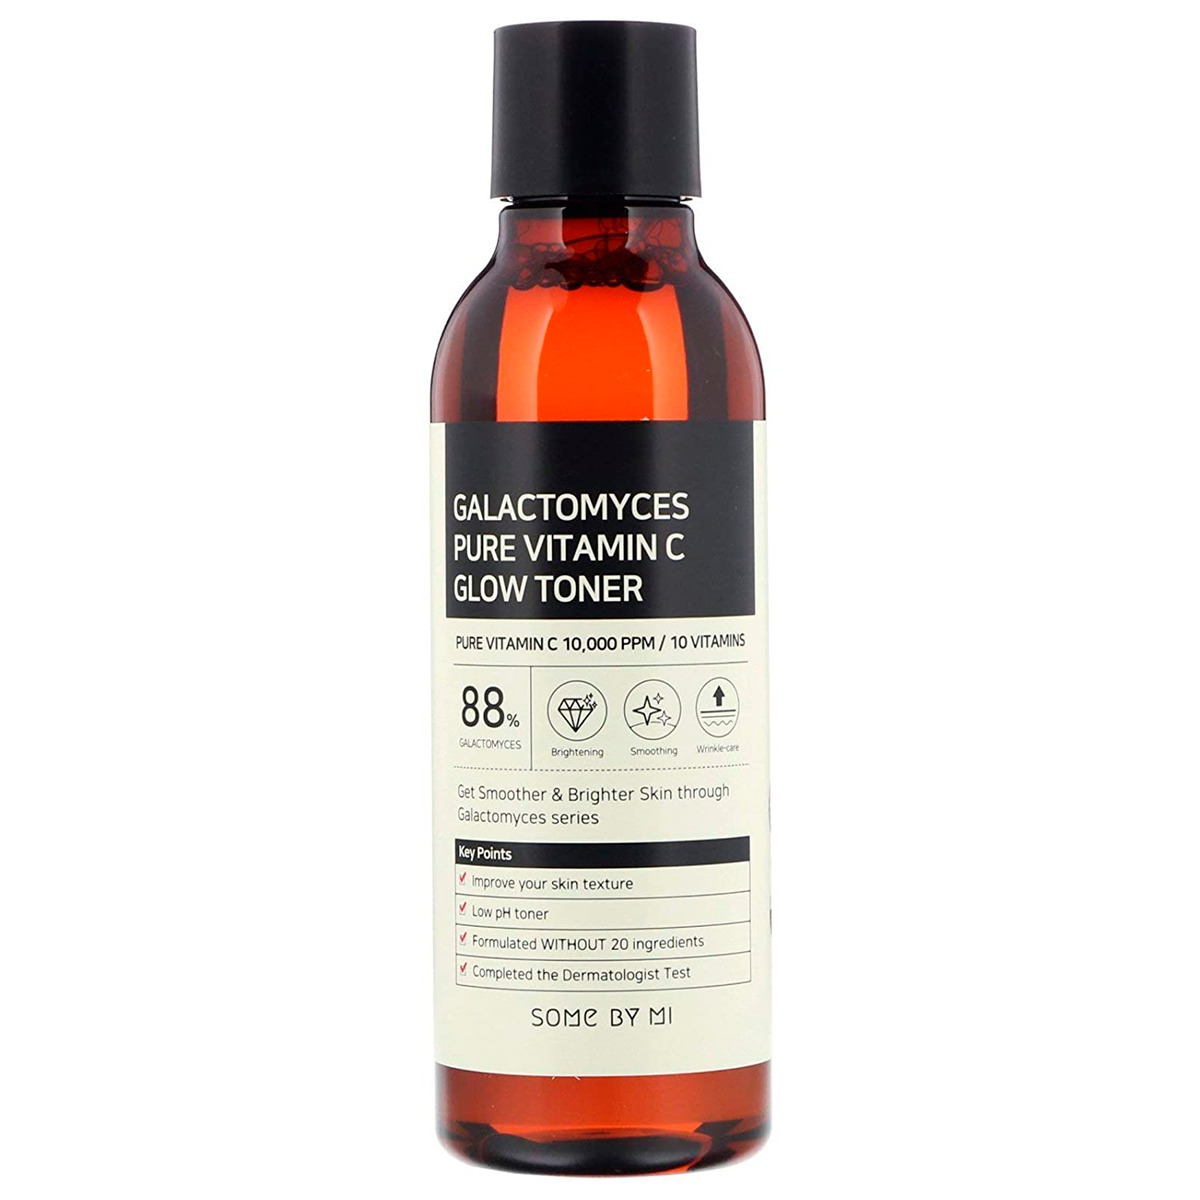 Some By Me Galactomyces pure vitamin c glow toner